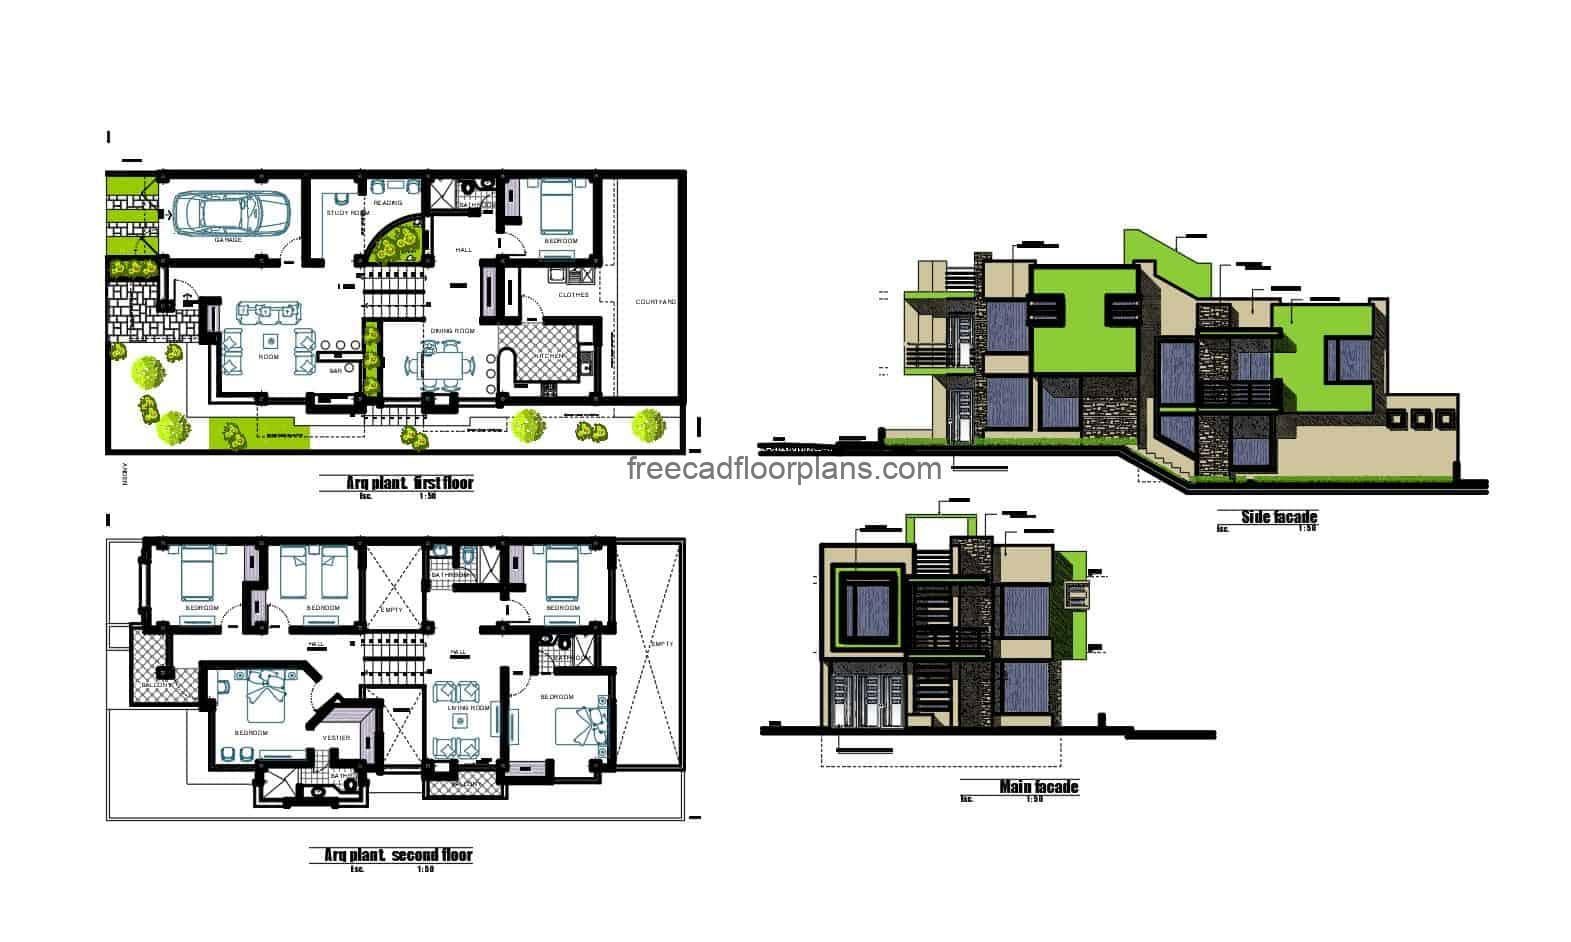 Architectural project of a modern two-storey house, furnished and detailed design with DWG blocks, several rooms in private area on second level, elevations and sections, architectural details